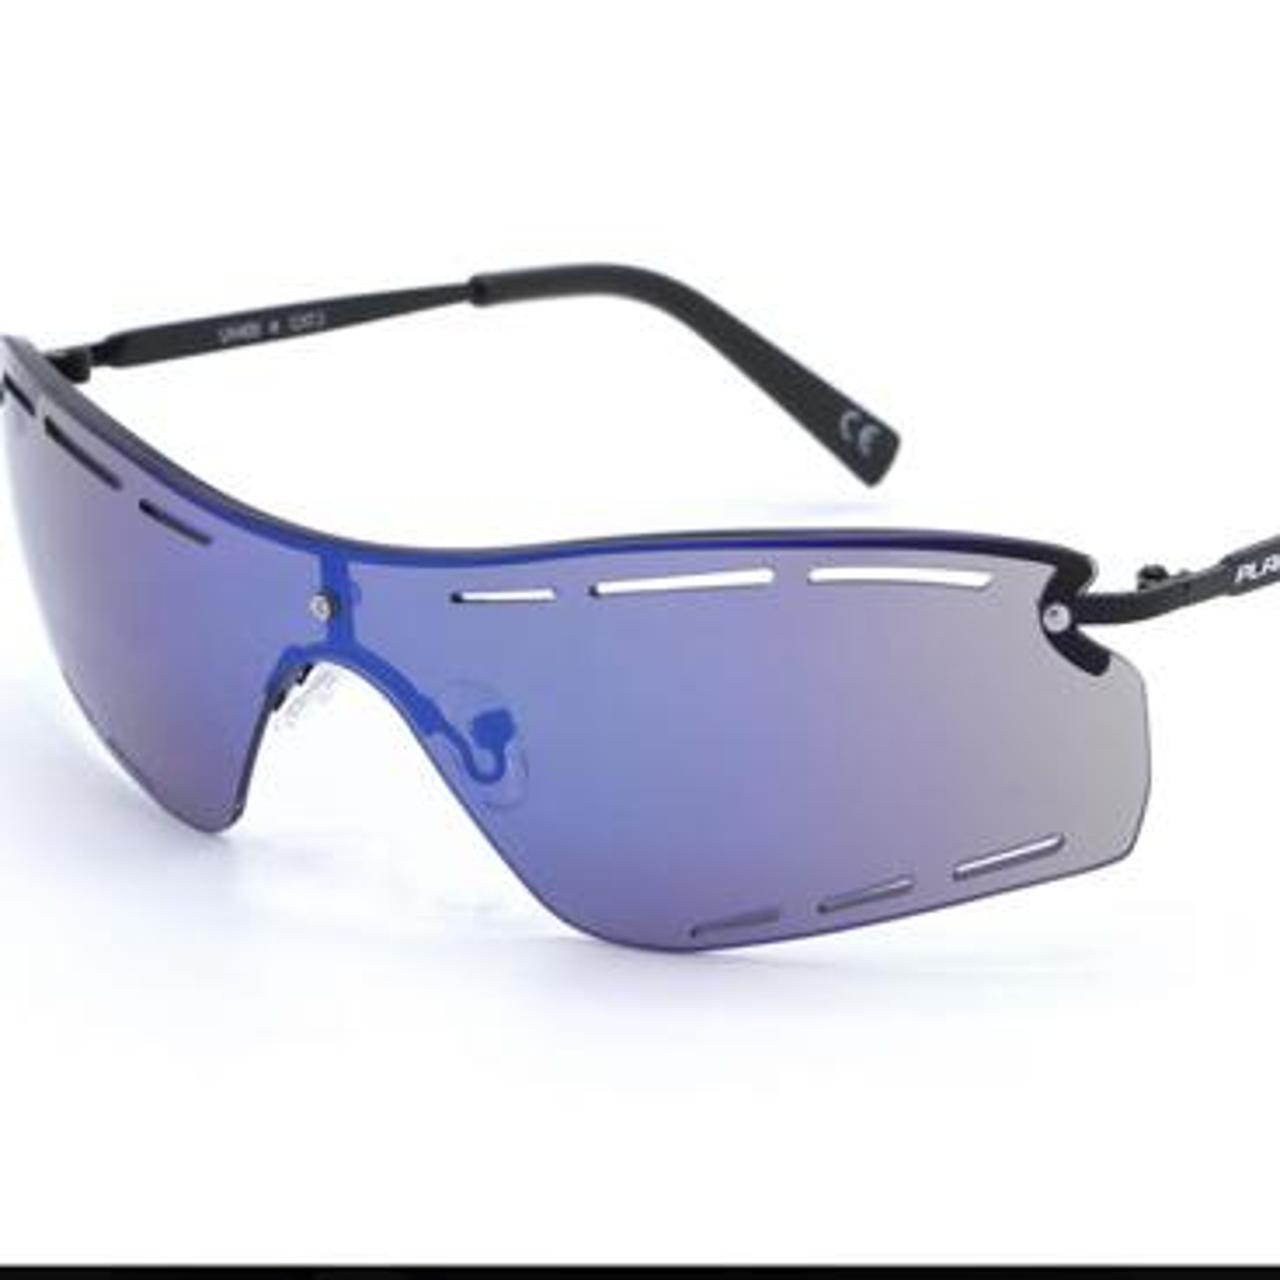 & Other Stories Men's Blue and Black Sunglasses